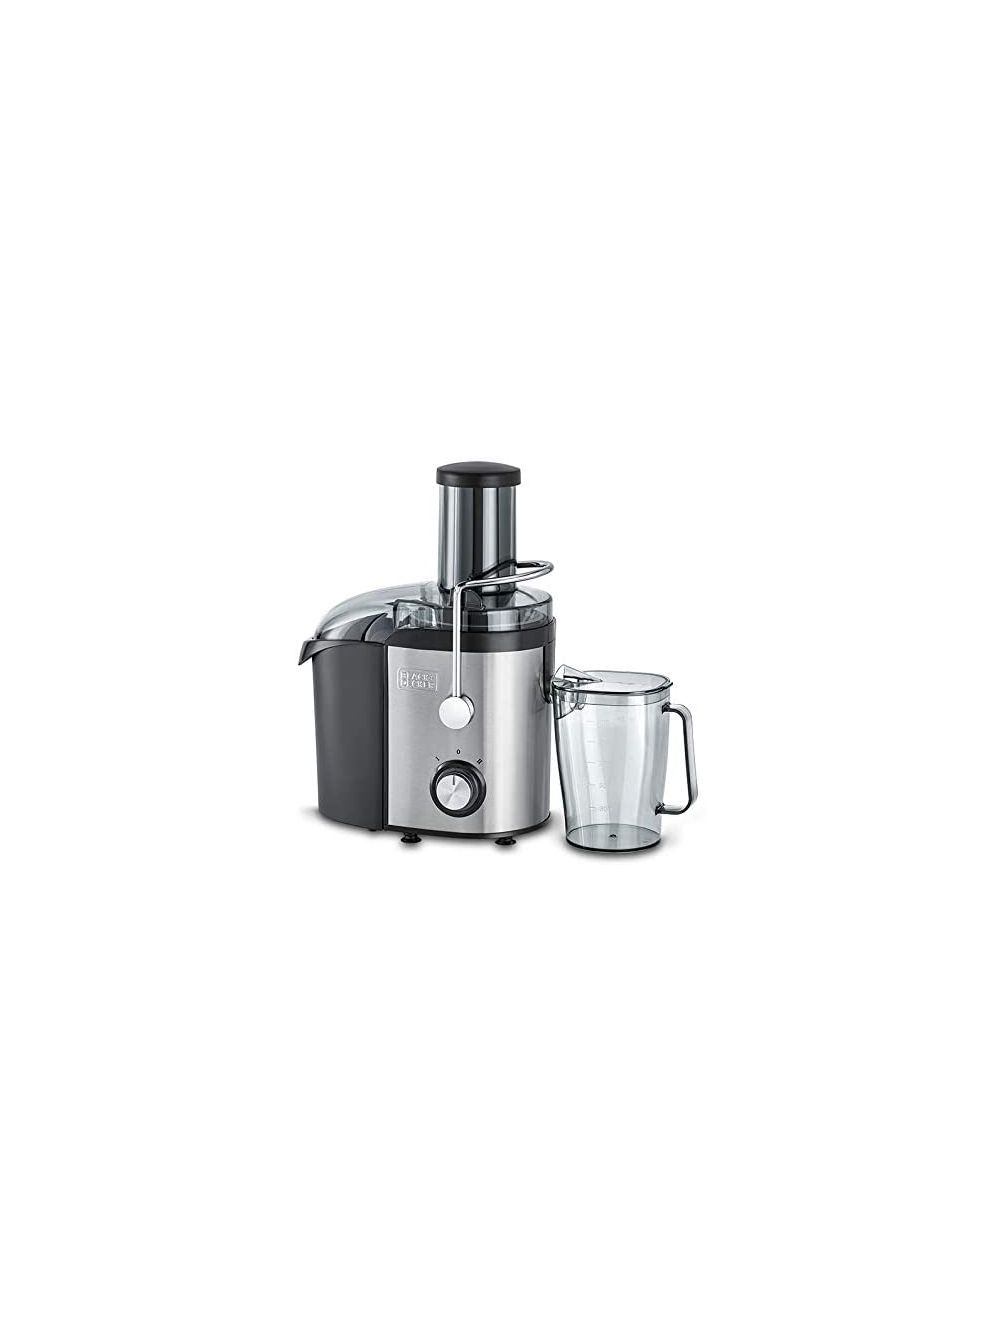 800W Stainless Steel Juicer Extractor, Silver, 1.7L-JE800-B5